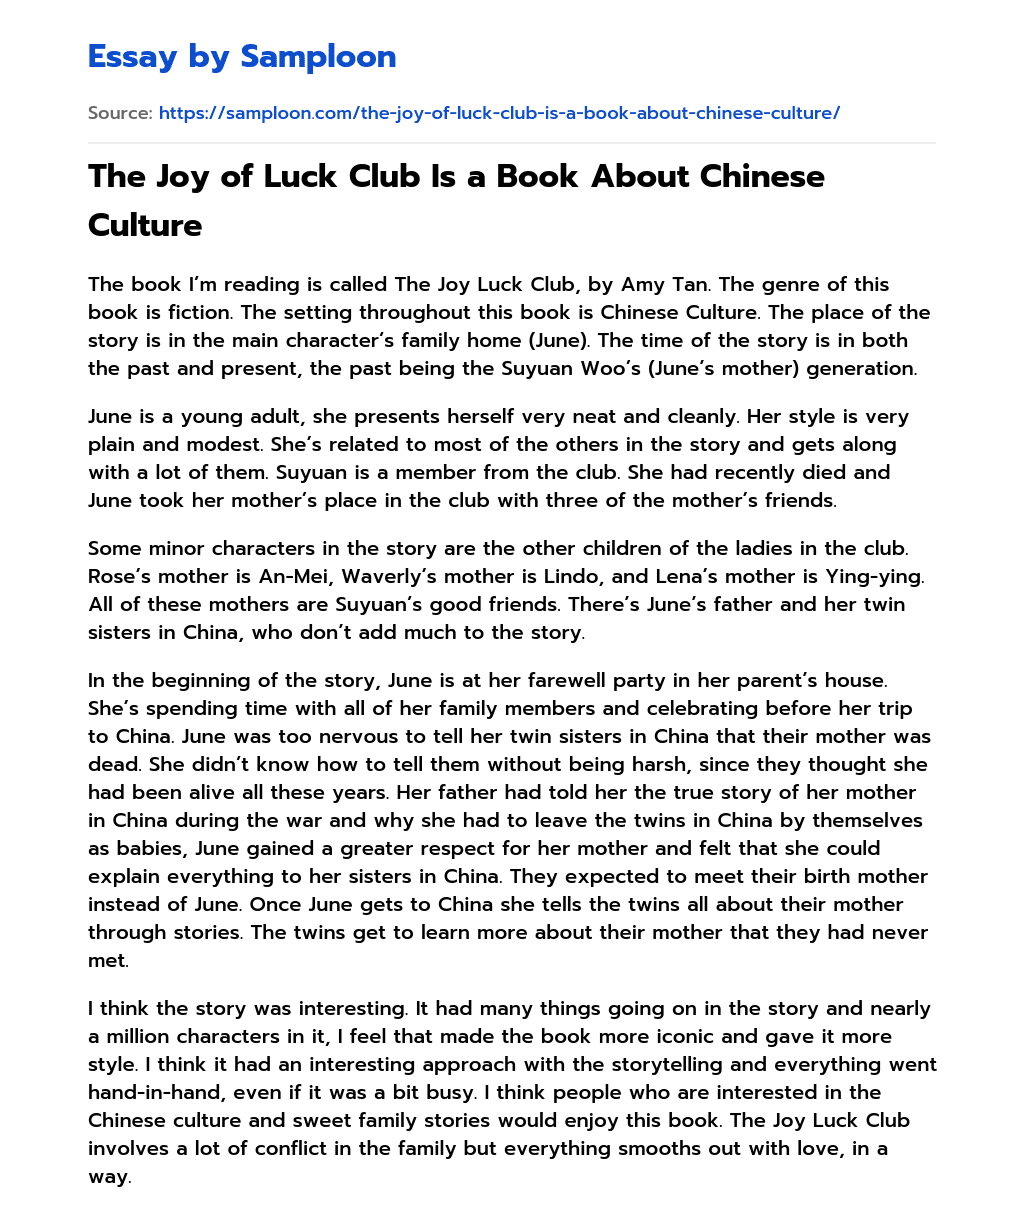 The Joy of Luck Club Is a Book About Chinese Culture essay